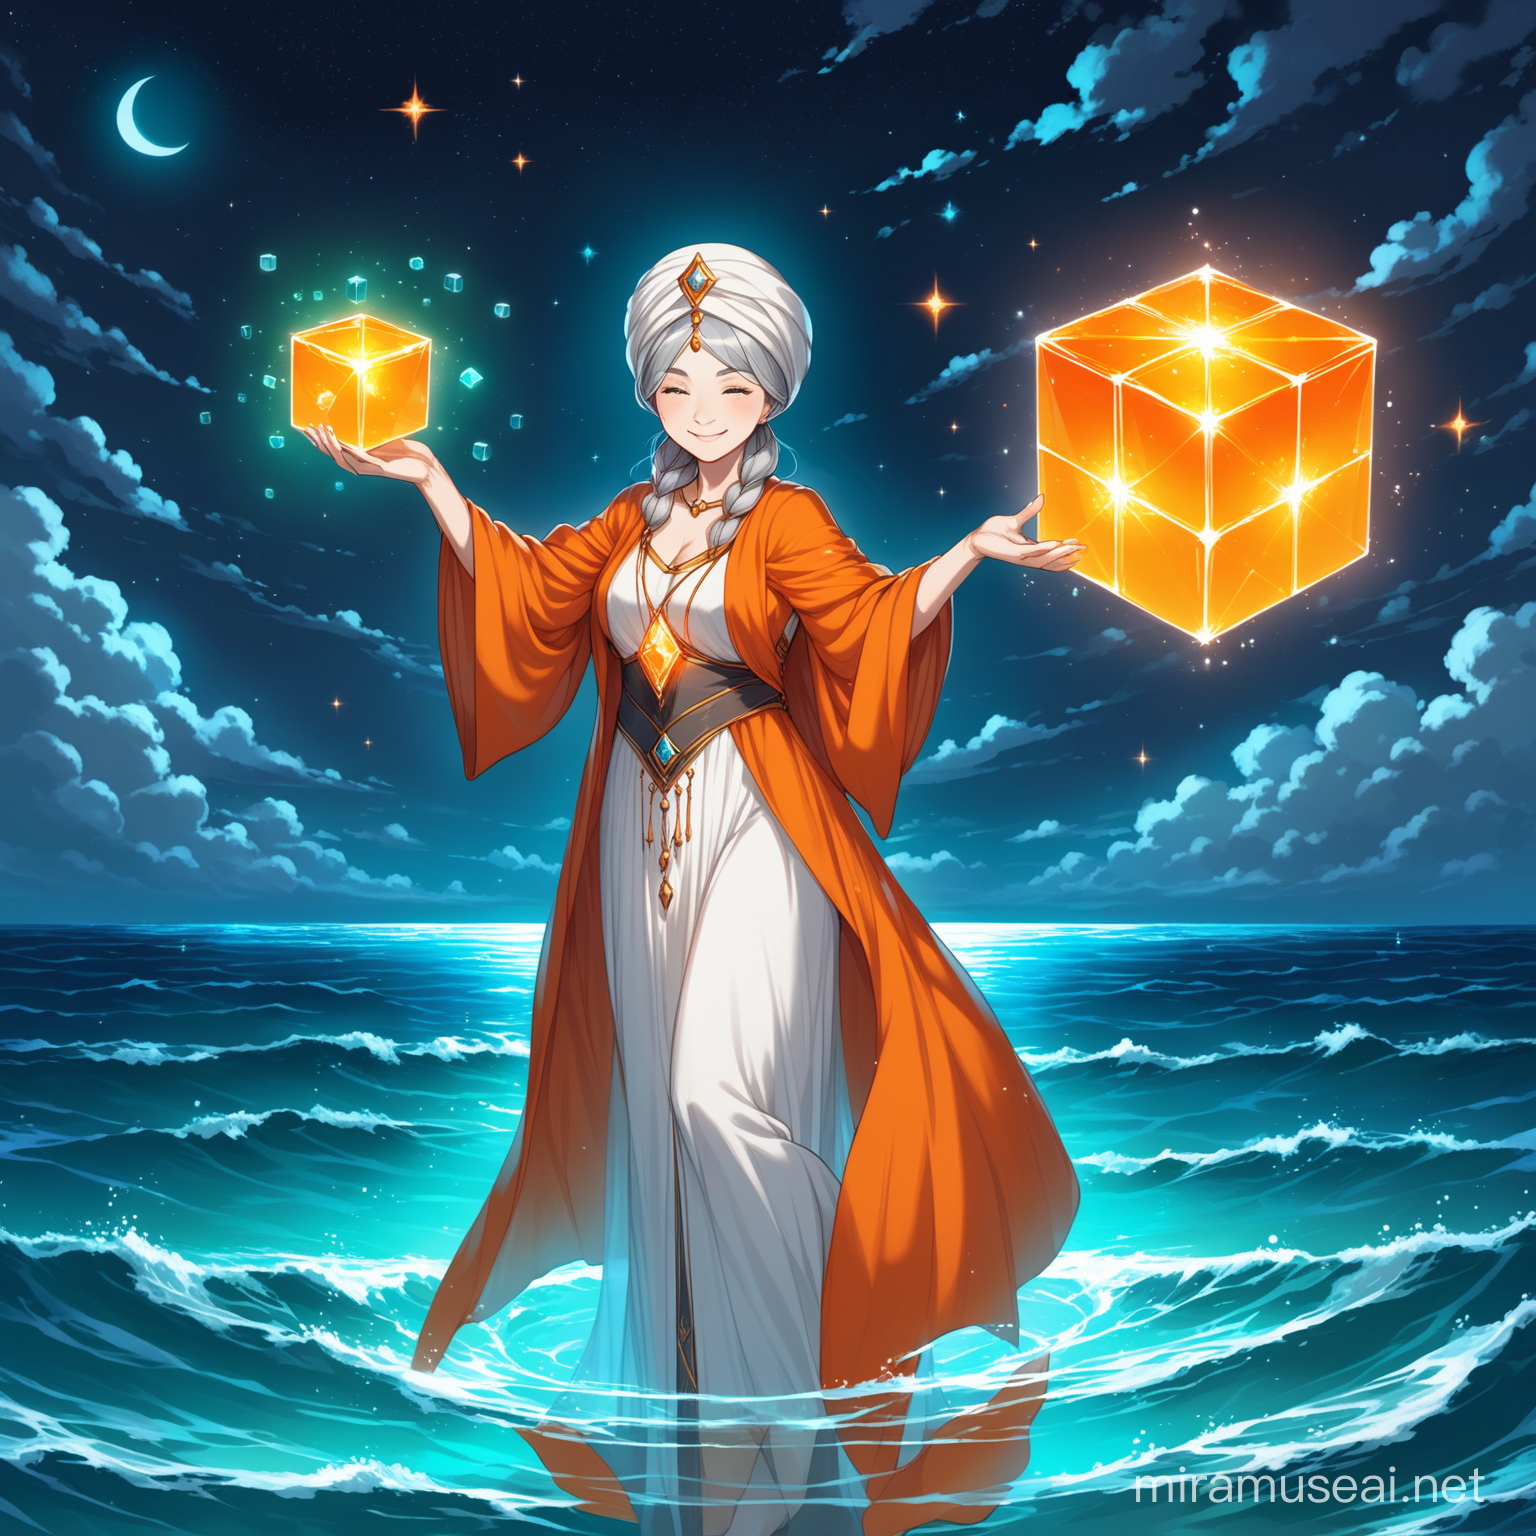 Smiling Sorceress with Orange Interdimensional Cube by the Sea at Night